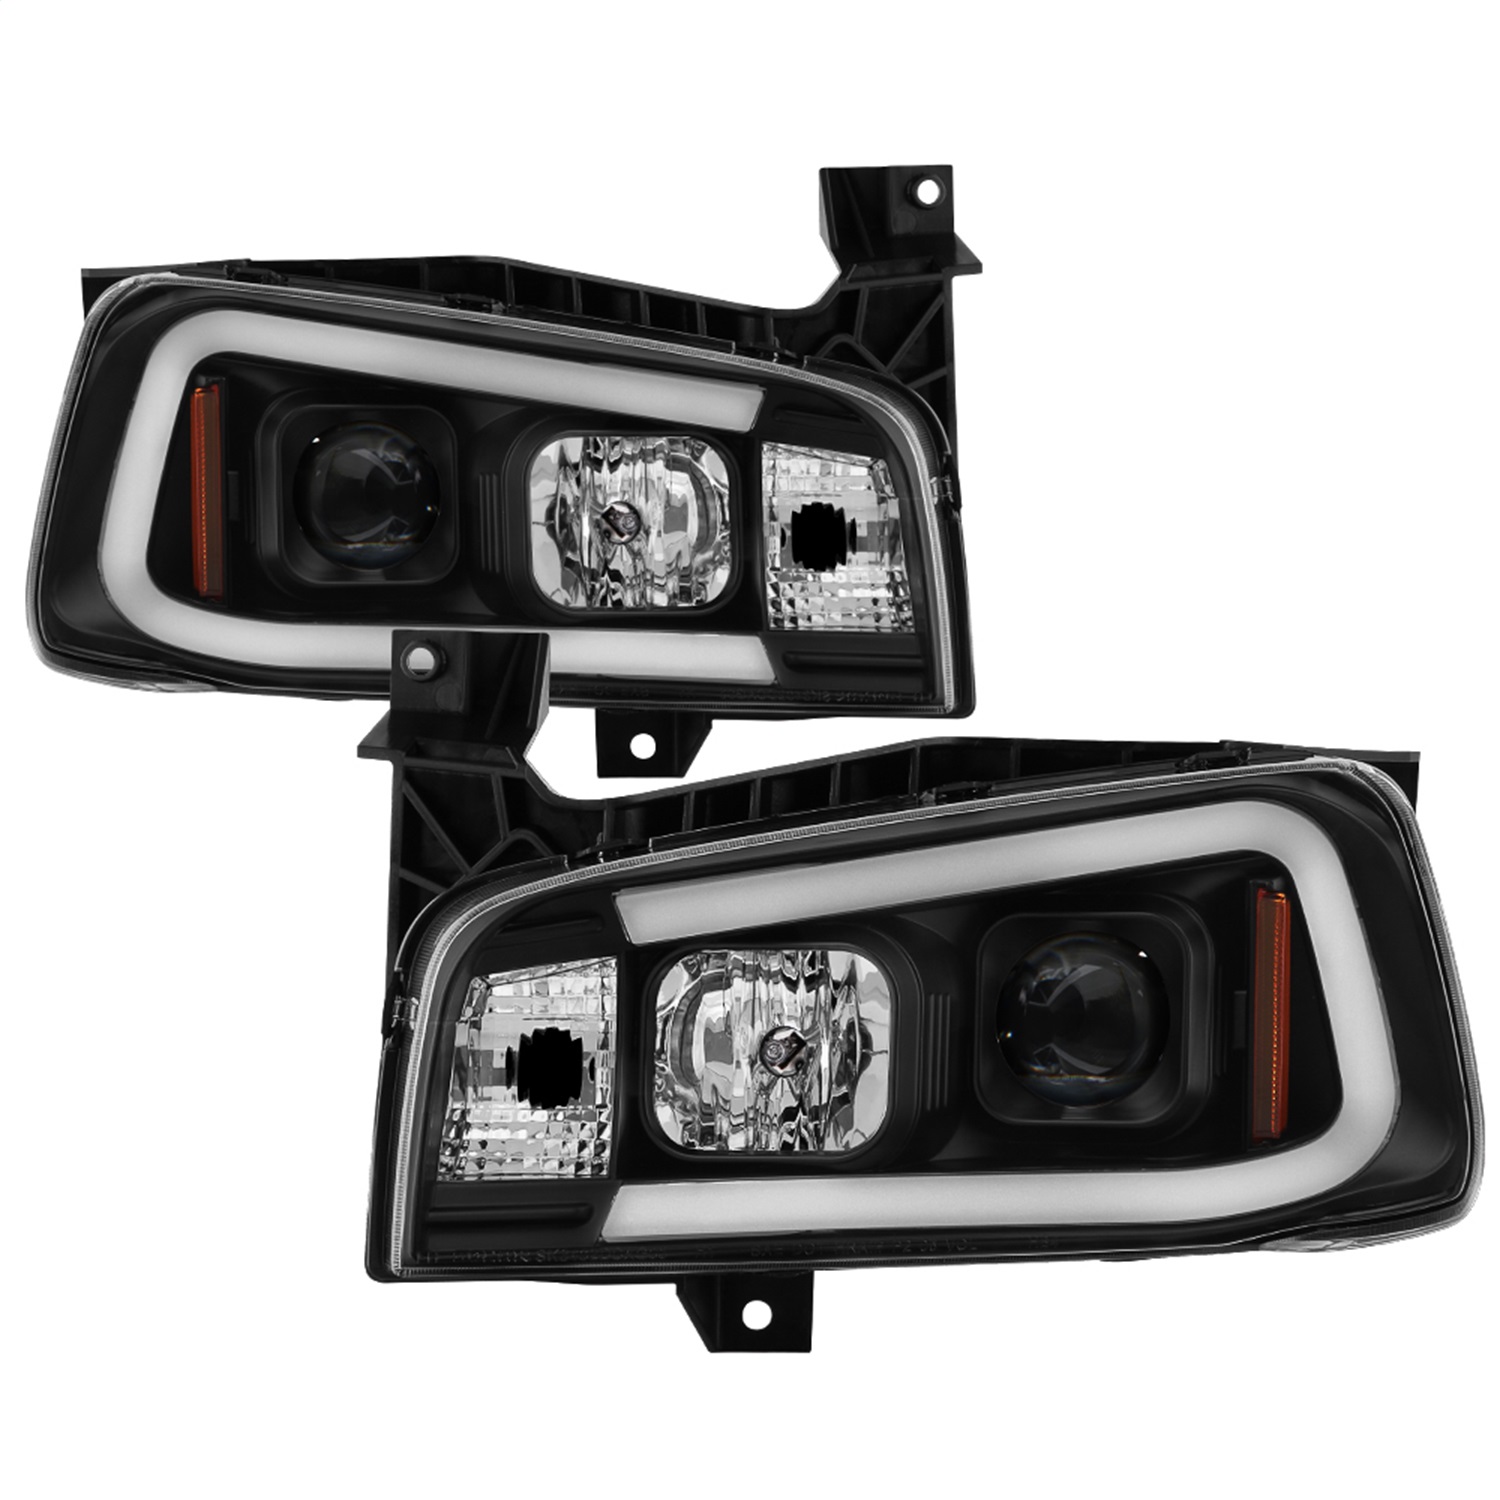 Spyder Auto 5085245 Projector Headlights Fits 06-10 Charger